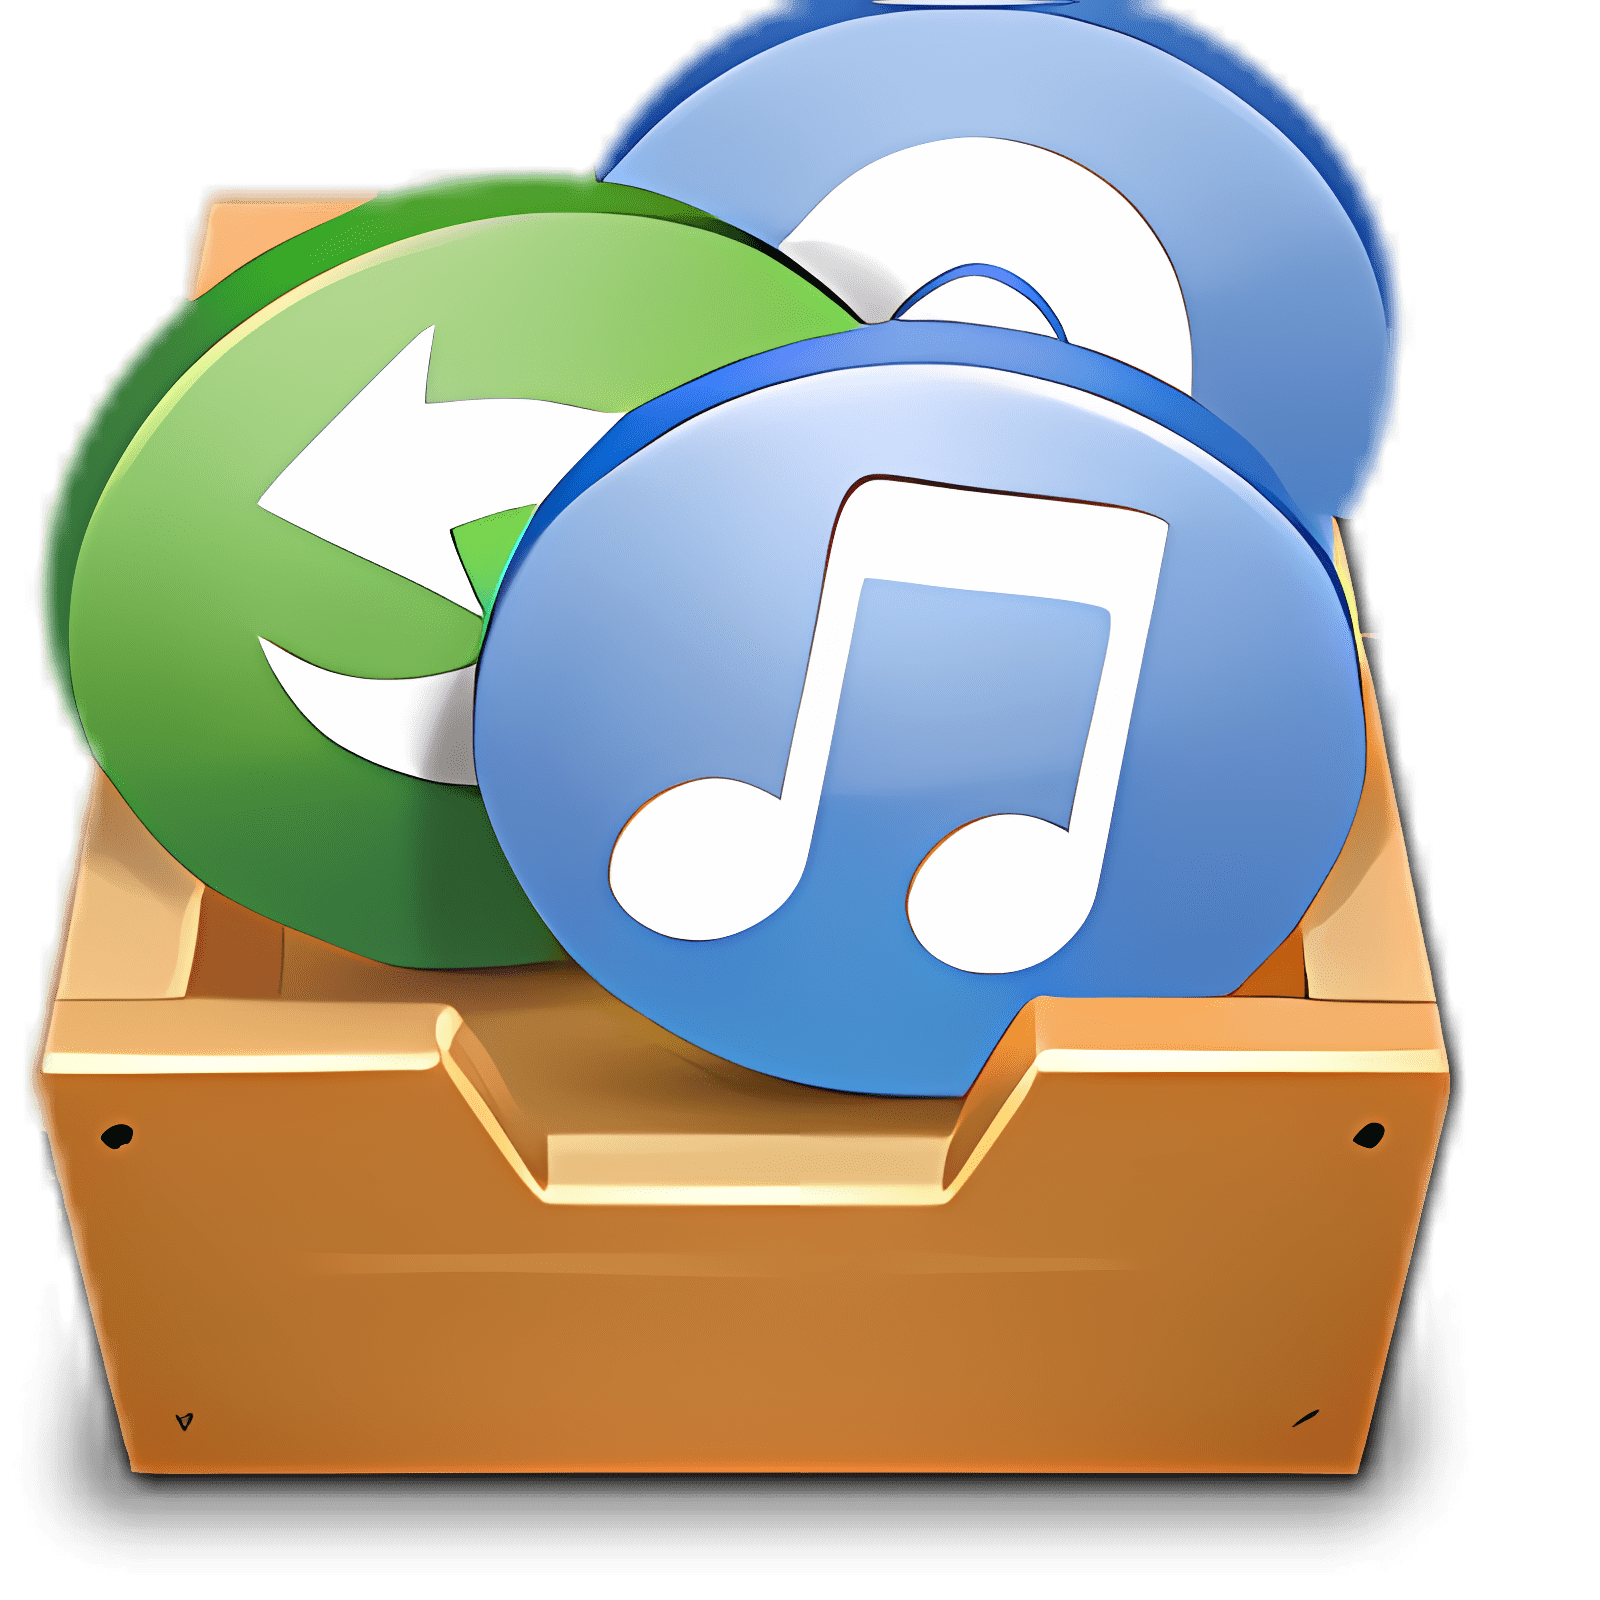 mp3 audio editor software download